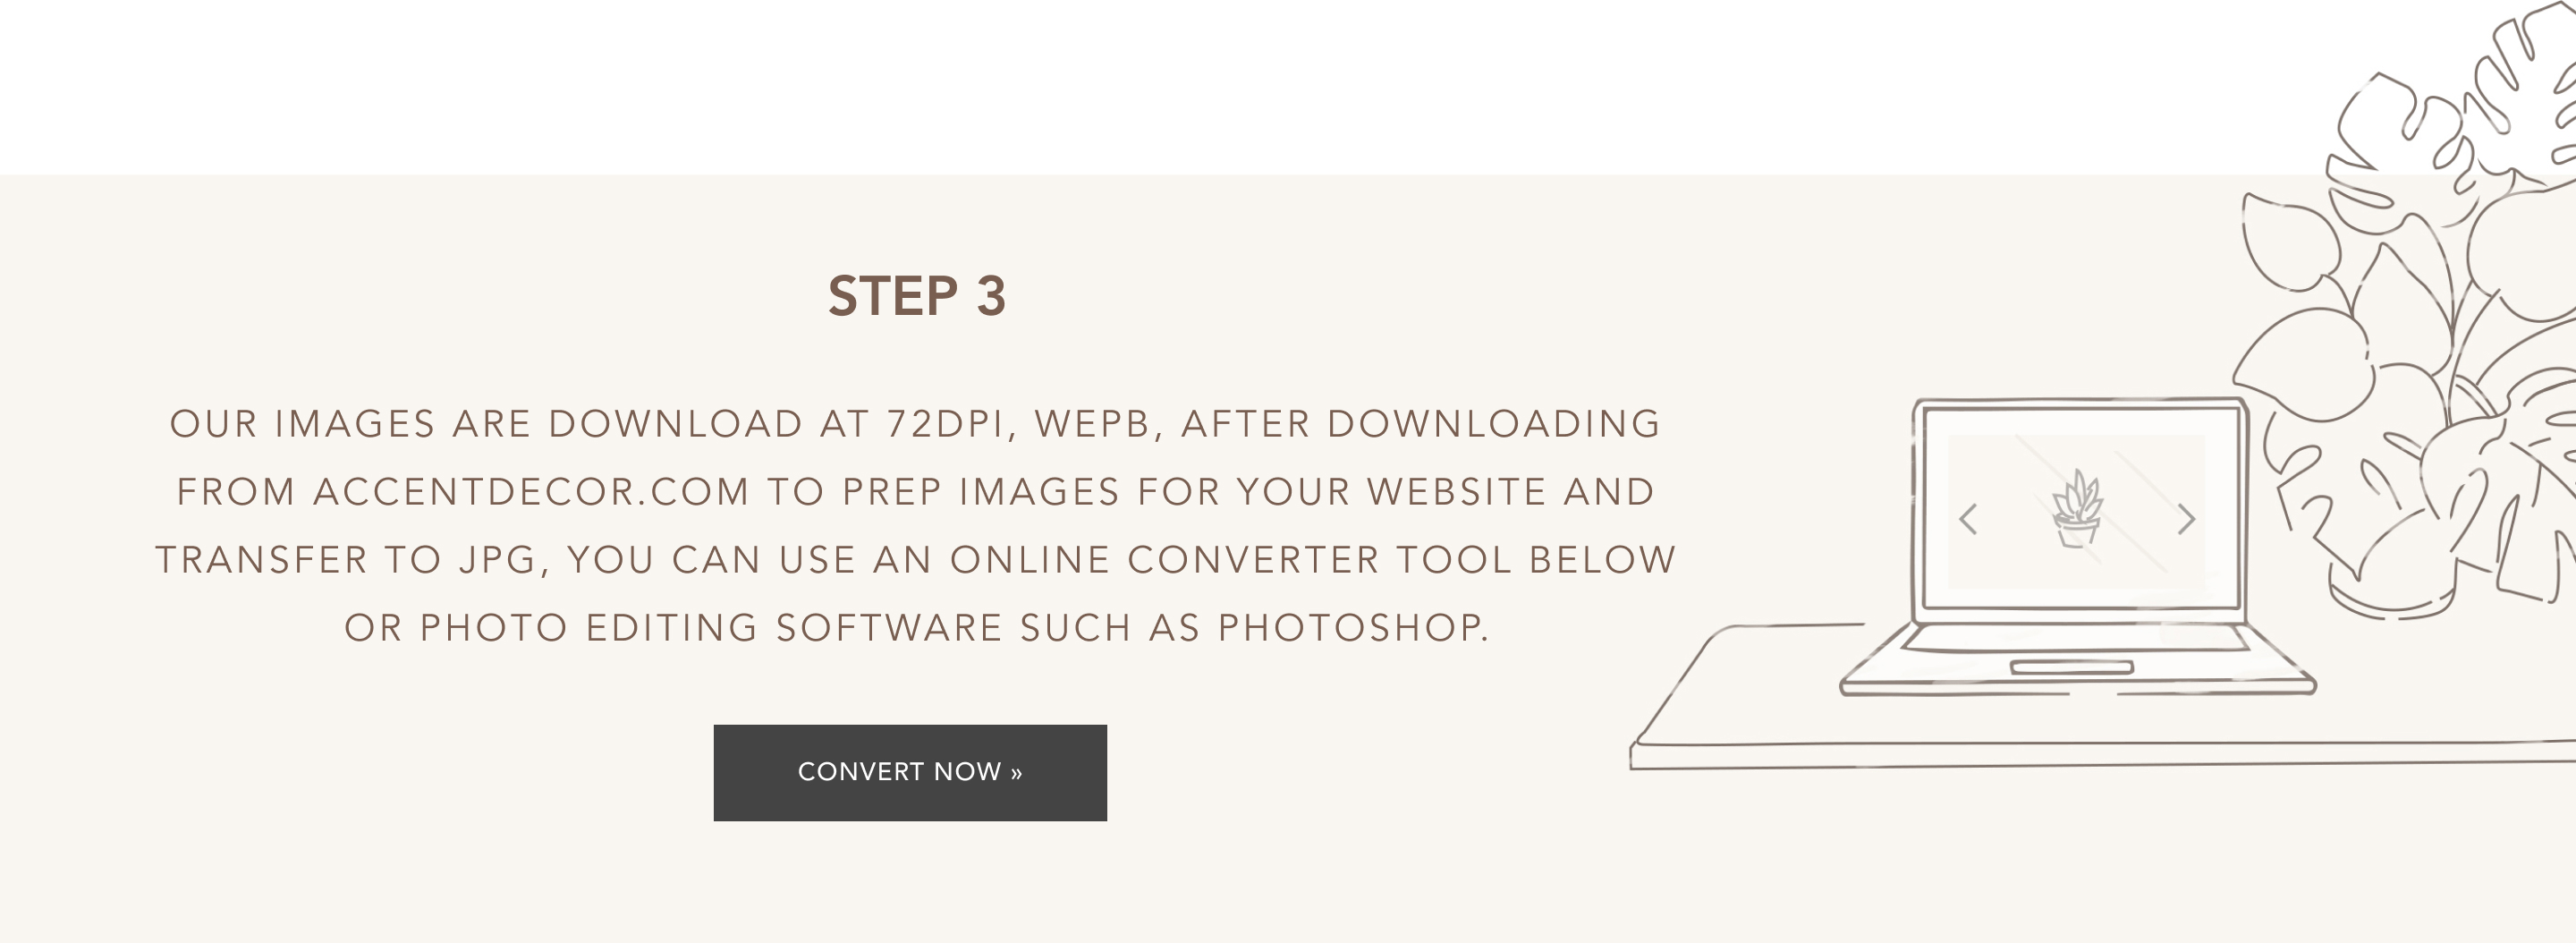 Use An Online Converter Tool to Prep Images for website ready use